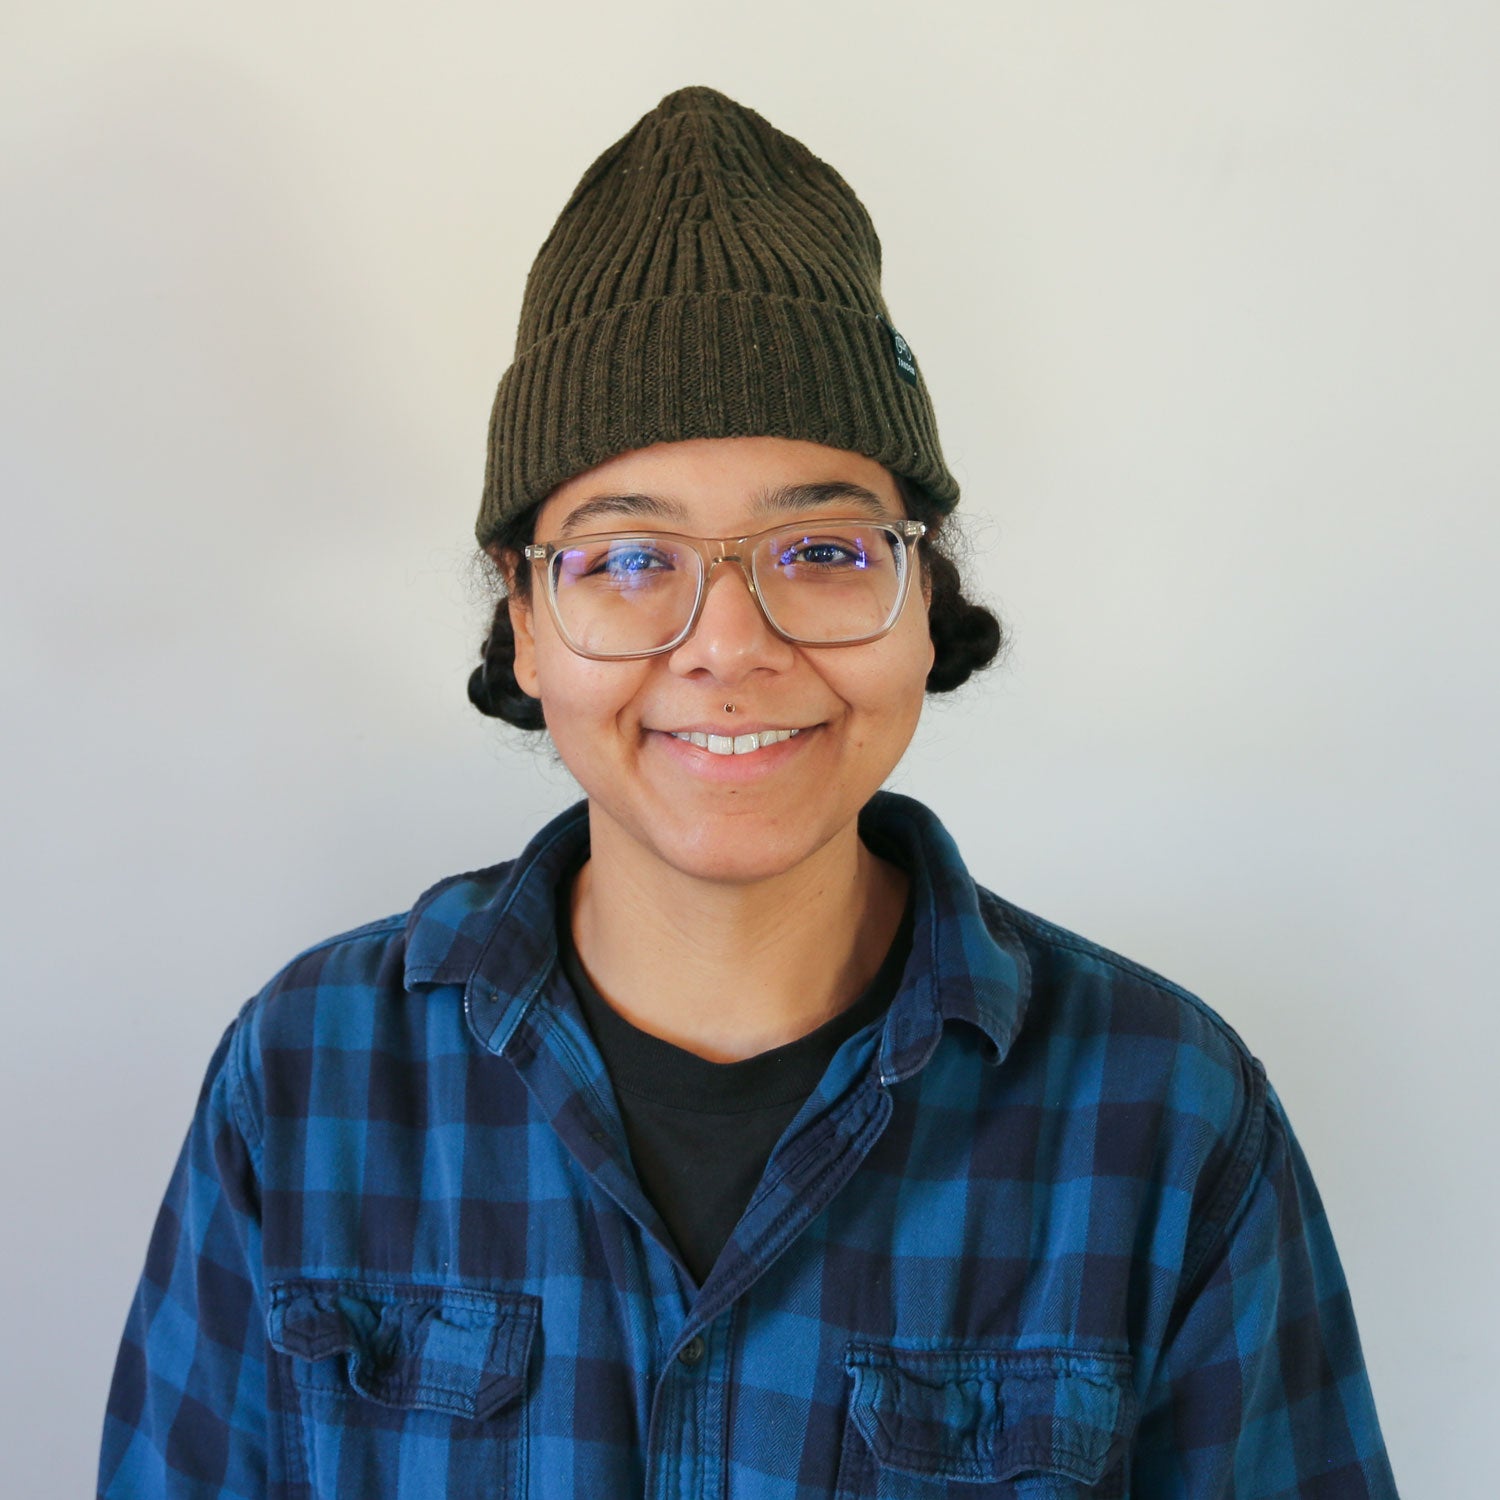 A young person wearing a green Tandem Coffee Roasters merino wool beanie, glasses, and a blue plaid shirt smiles warmly at the camera, against a light neutral background.